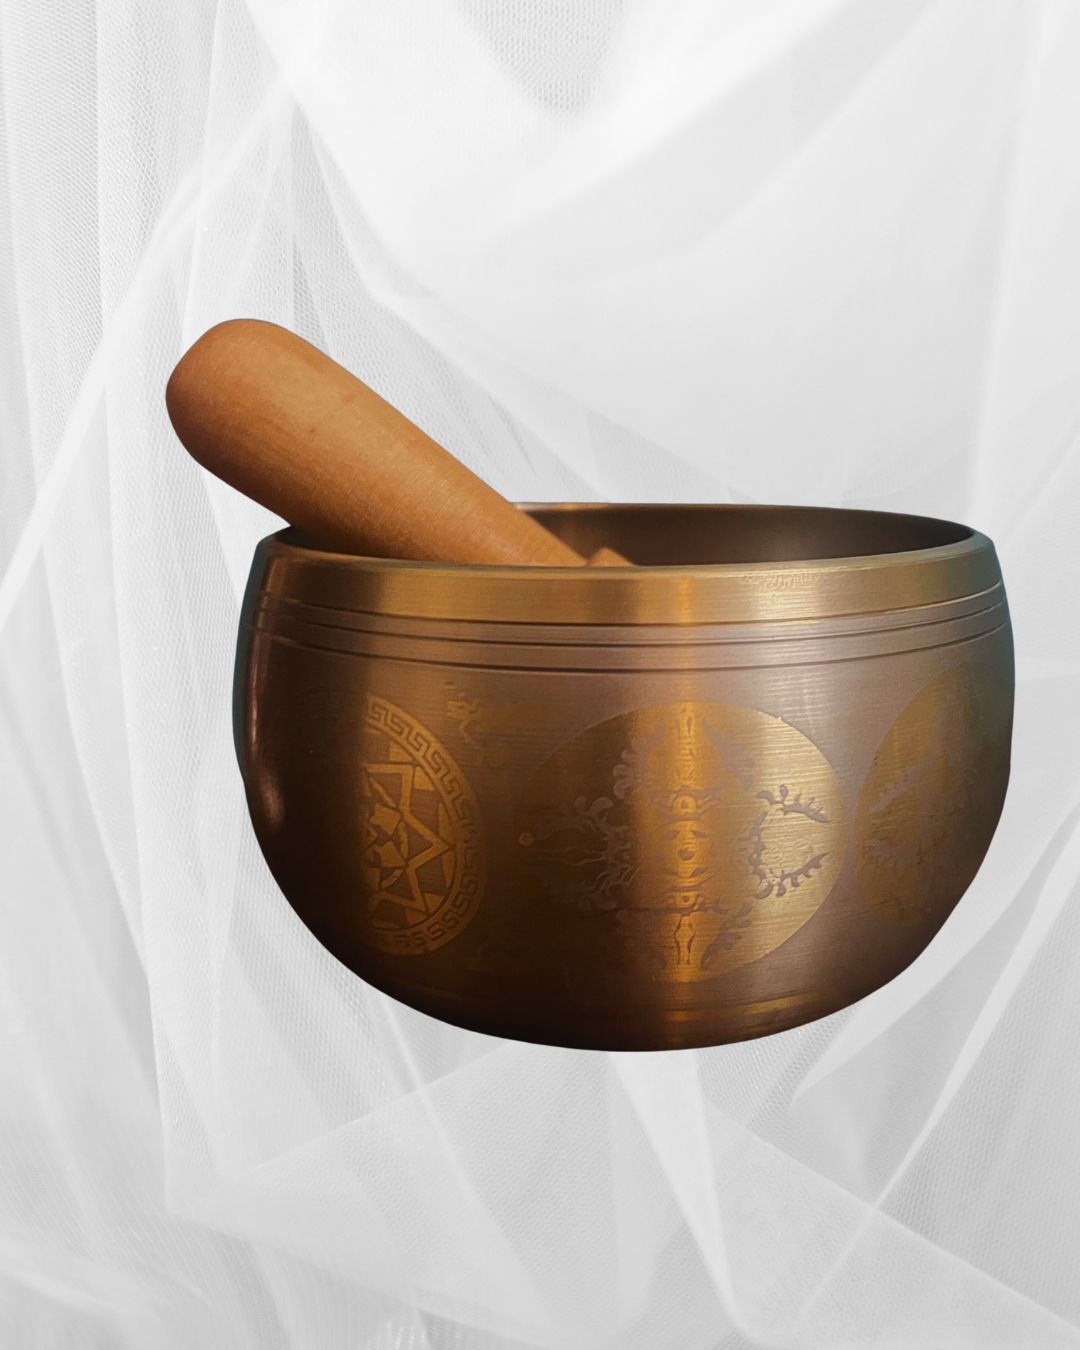 Singing Bowl - 5-metal Panchaloha Hand-hammered Engraved Bowl (4 inch) with Wooden Mallet